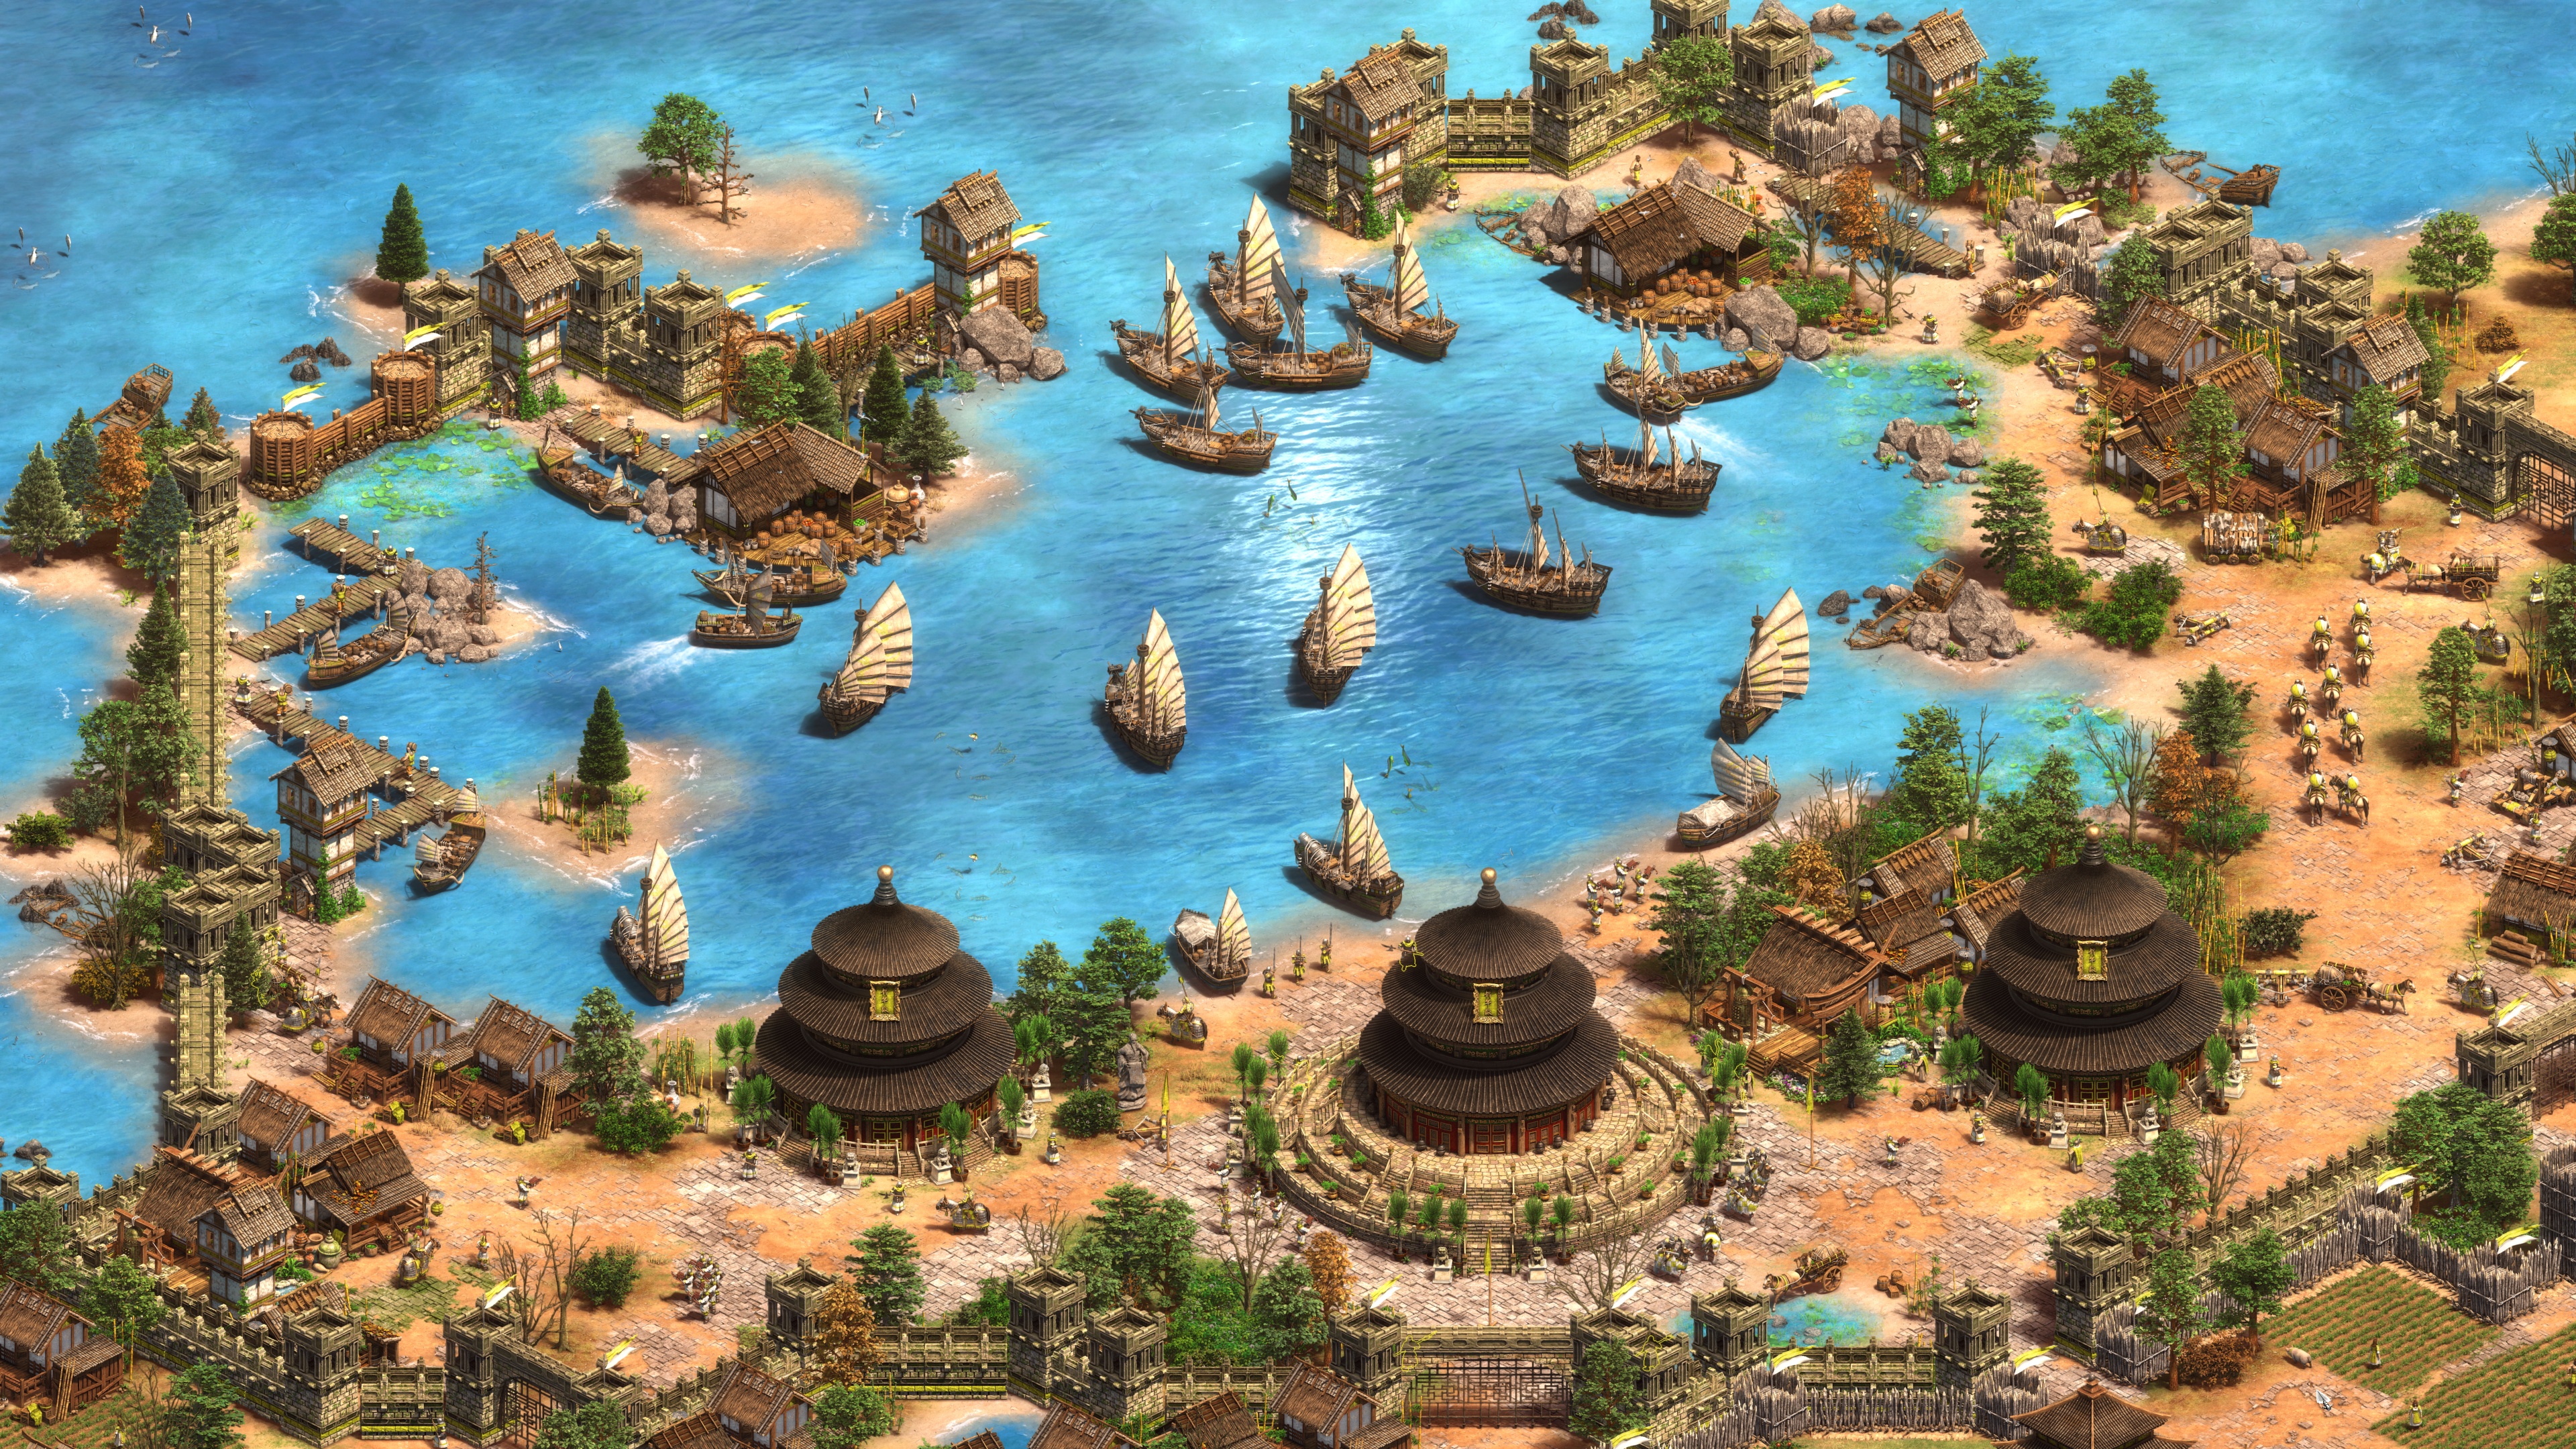 Age of Empires 2 Definitive Edition